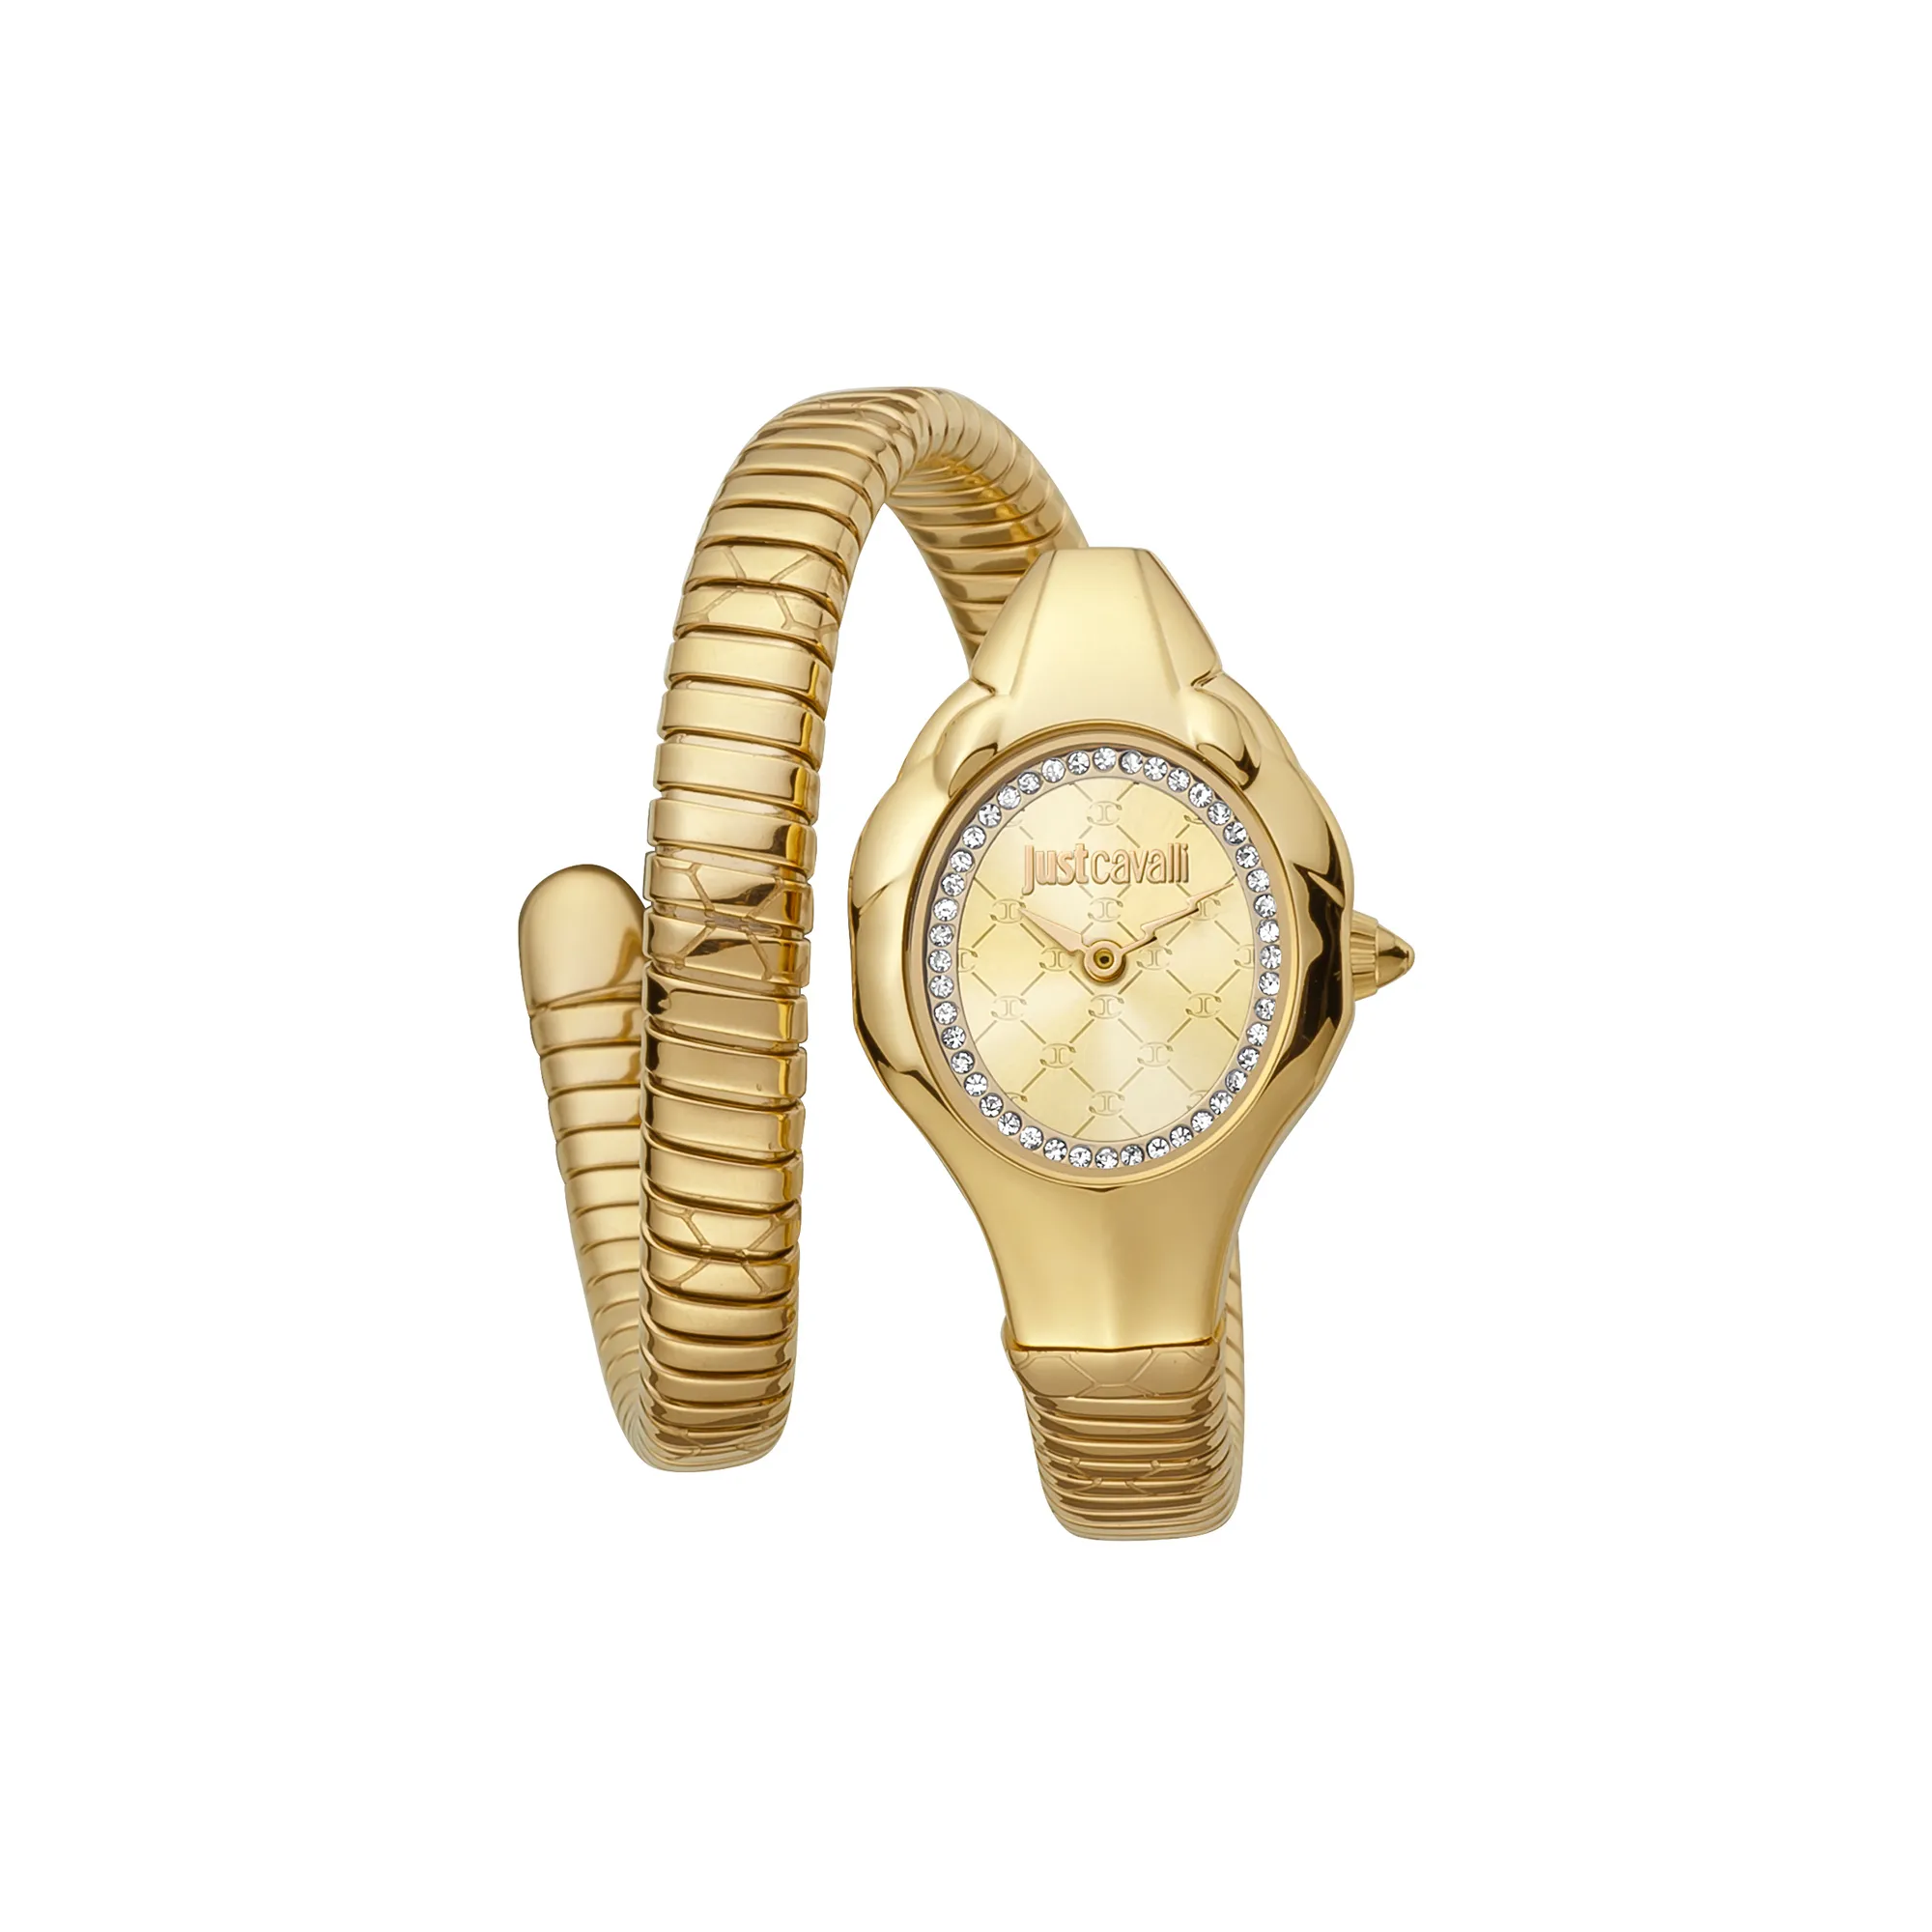 Head Corto Snake Gold Champagne - Just Cavalli Watches